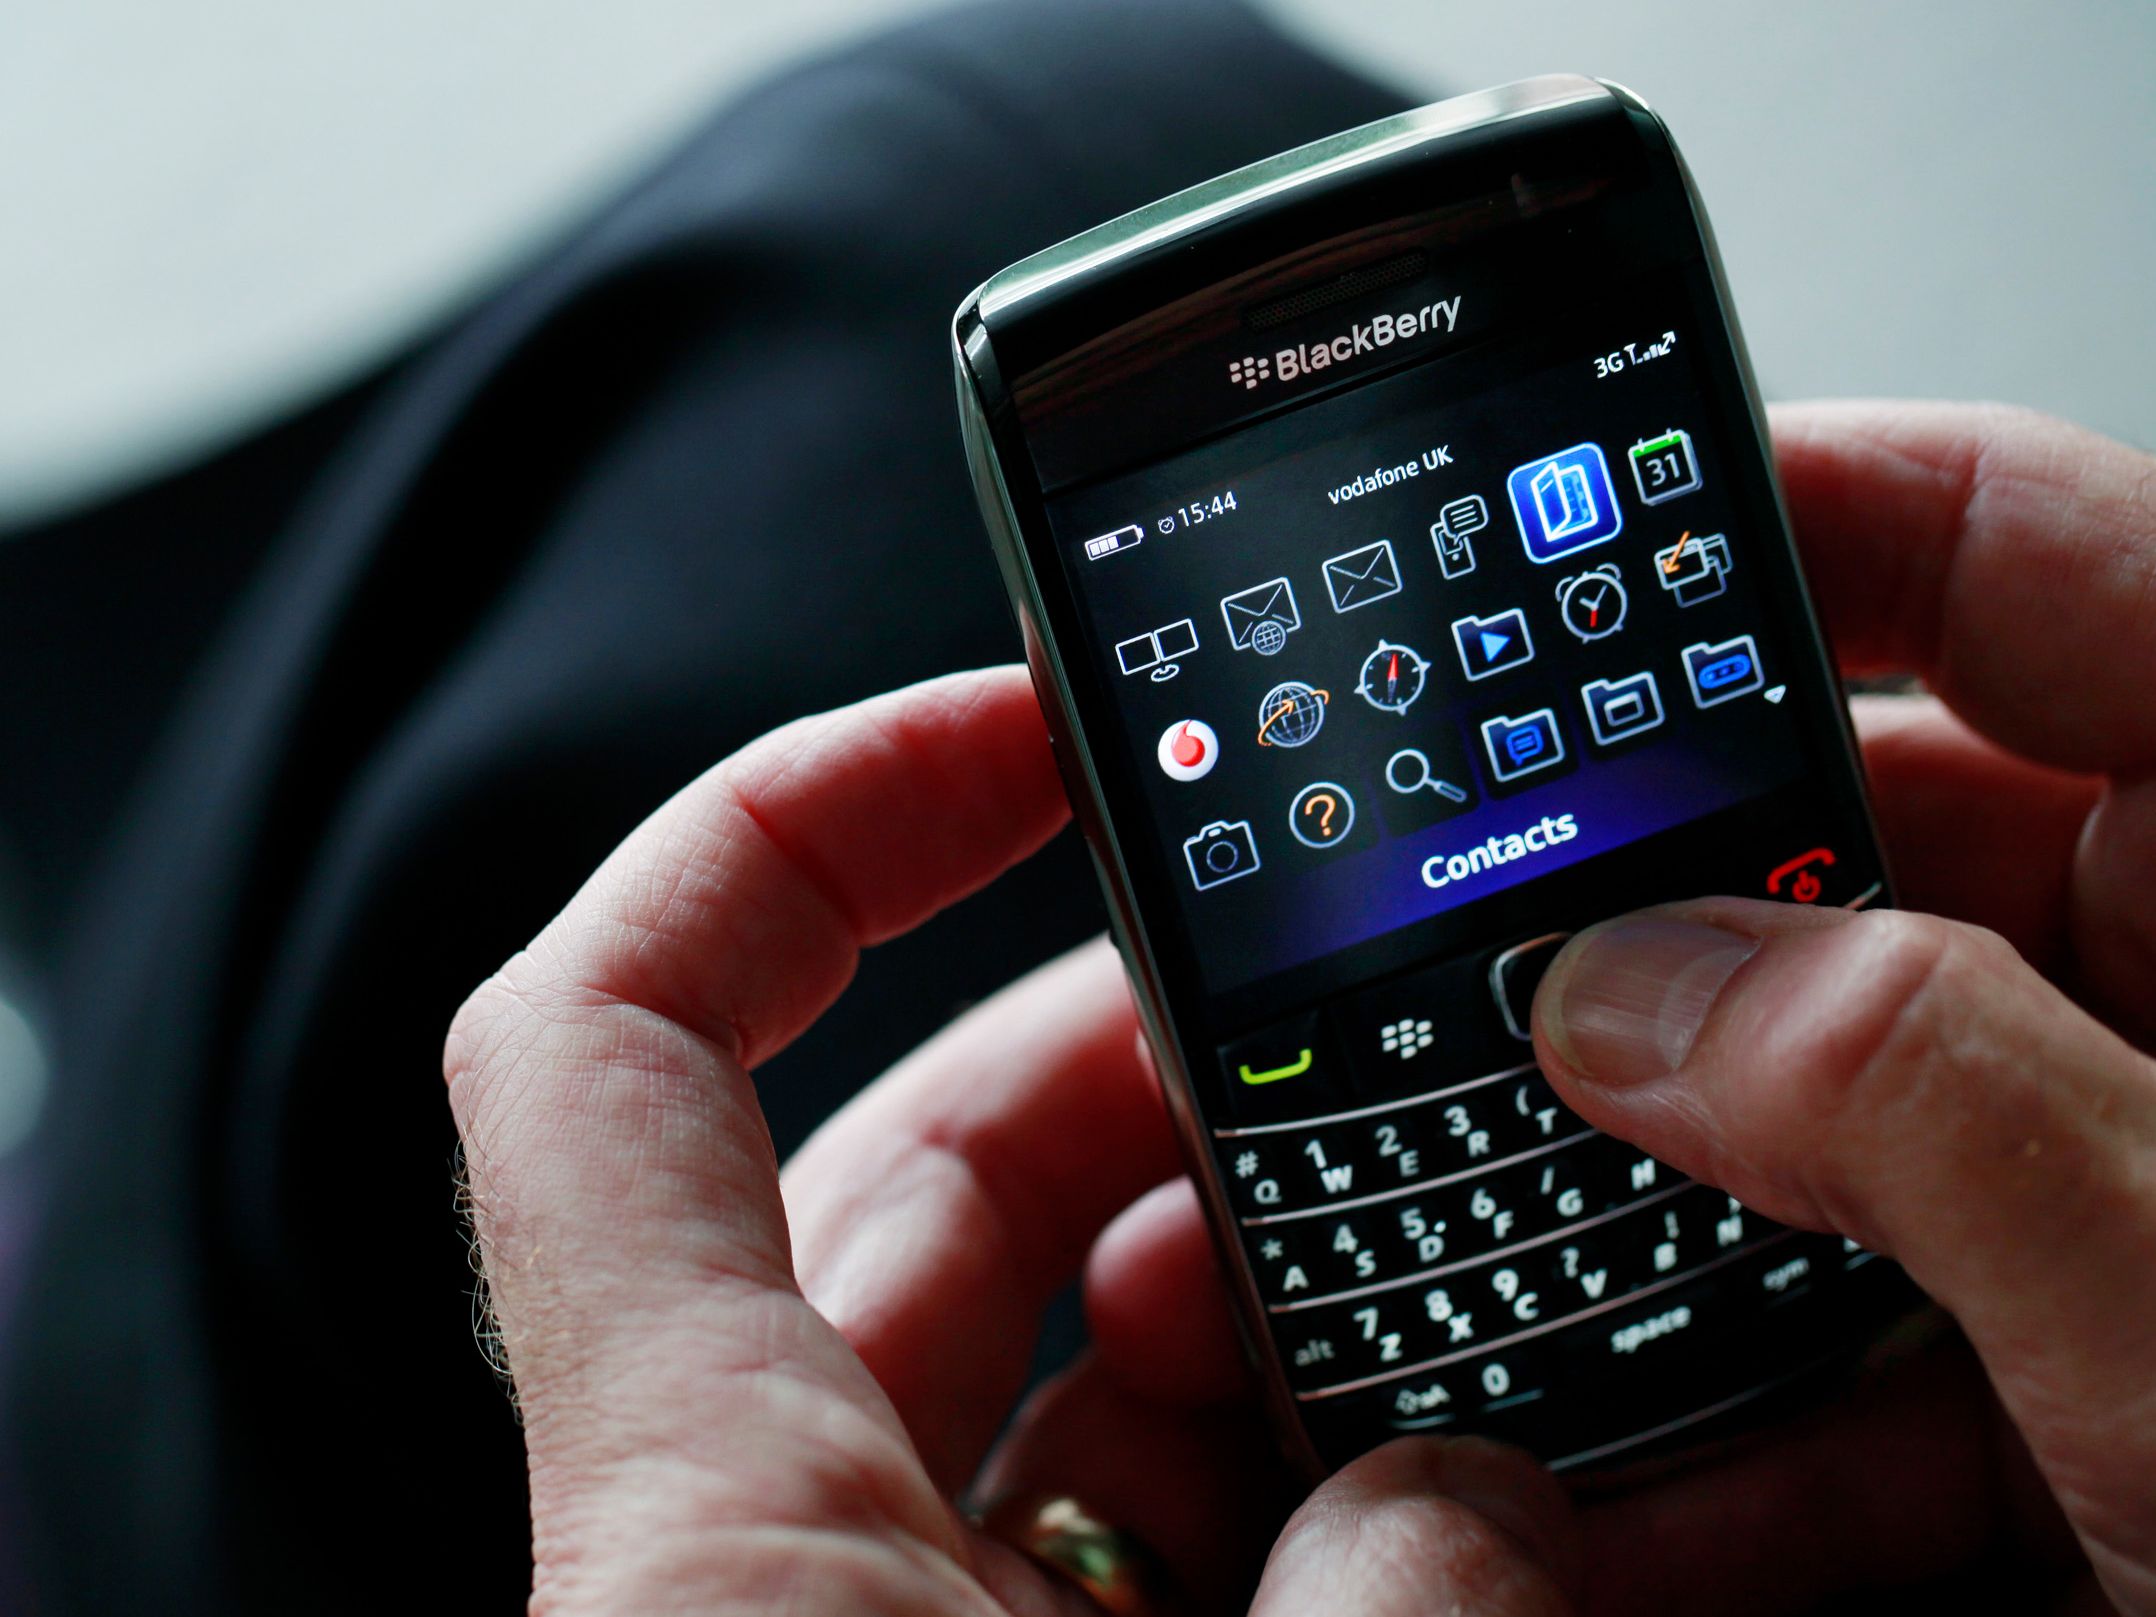 all-time PR blunders - blackberry phone - BlackBerry ? vodafone Uk A alt 1 a E Contacts 88 Q 1 3 , 2 W 3G T.. 12 & & 'v 7 8 0 31 space